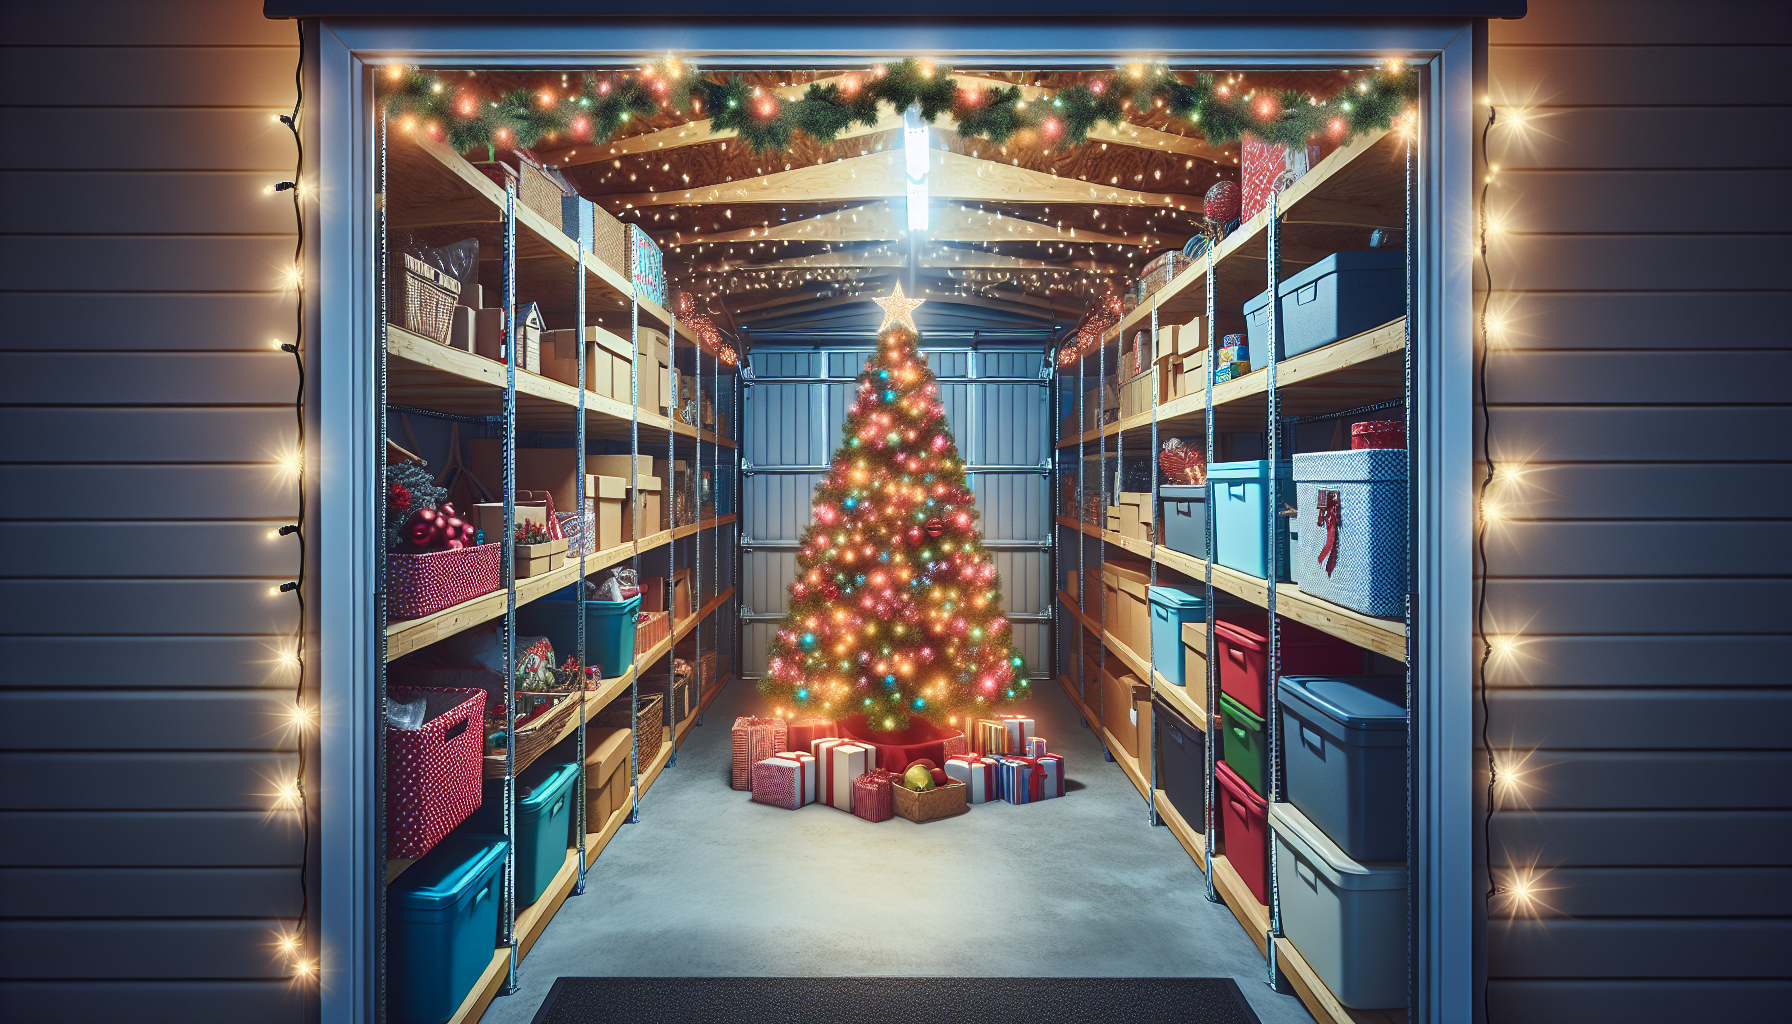 Can a portable garage be used to store holiday decorations?